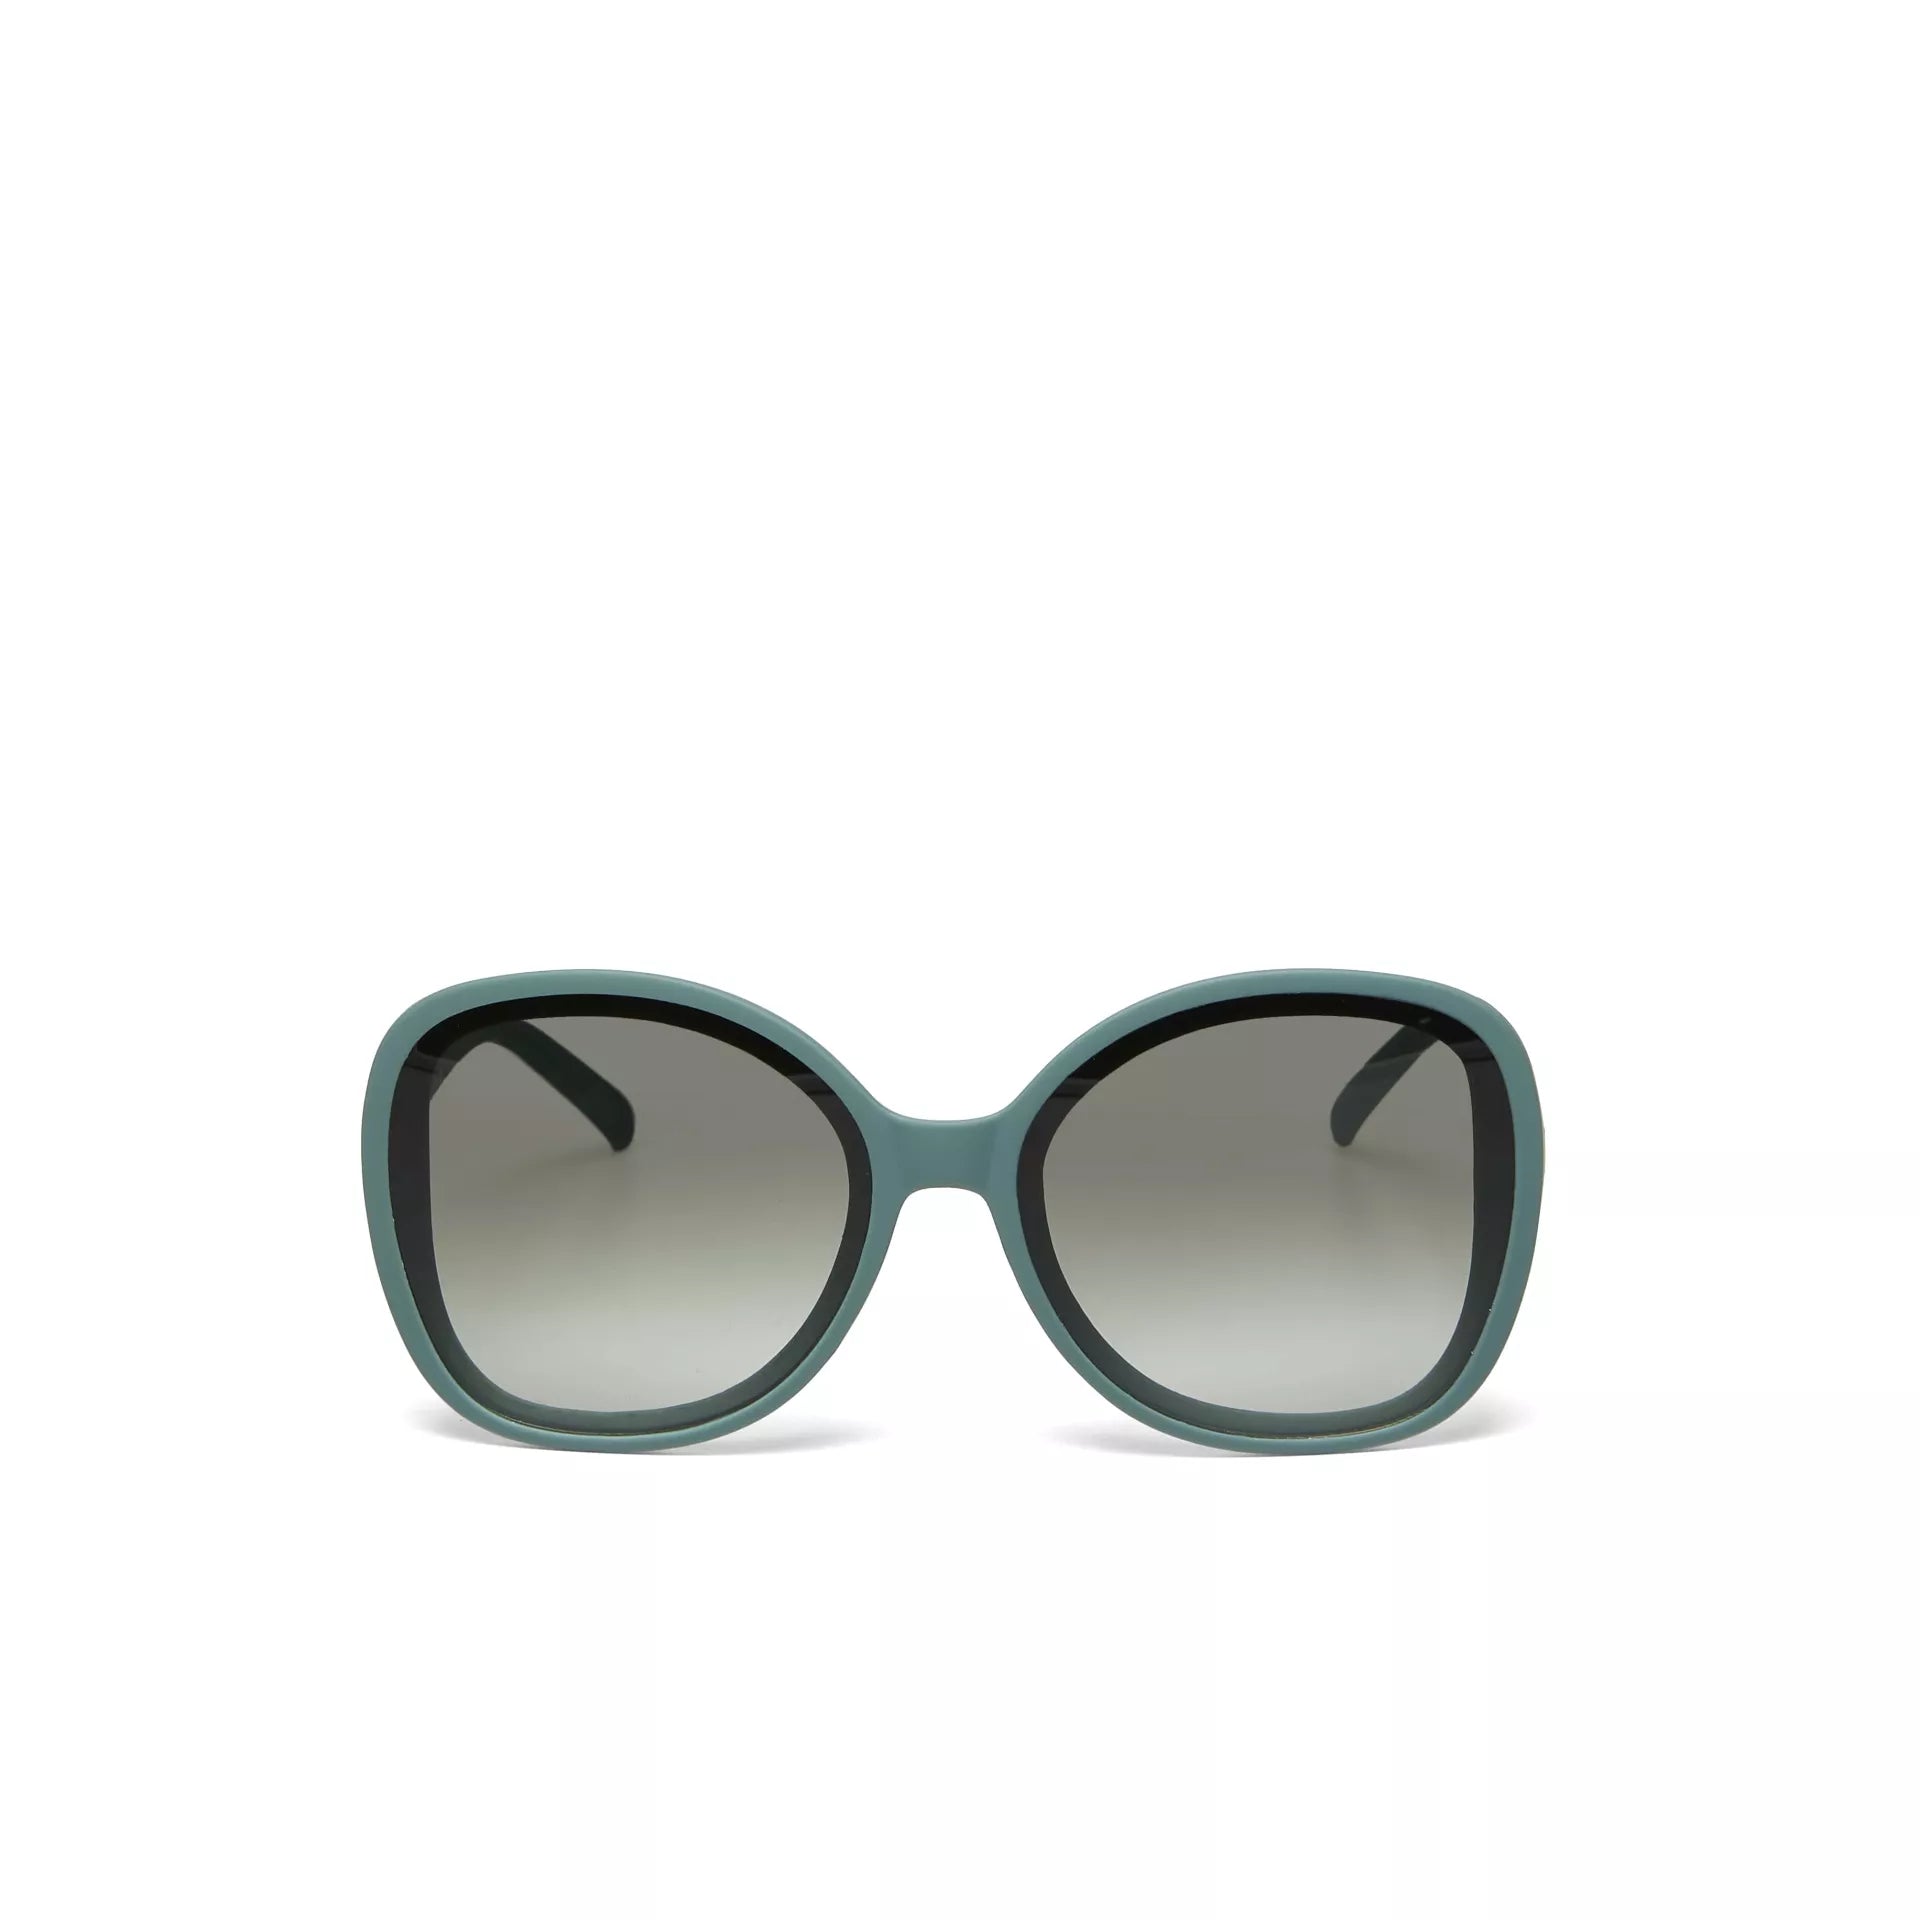 Fabulous Gifts Okkia Sunglasses Butterfly Green Sage by Weirs of Baggot Street